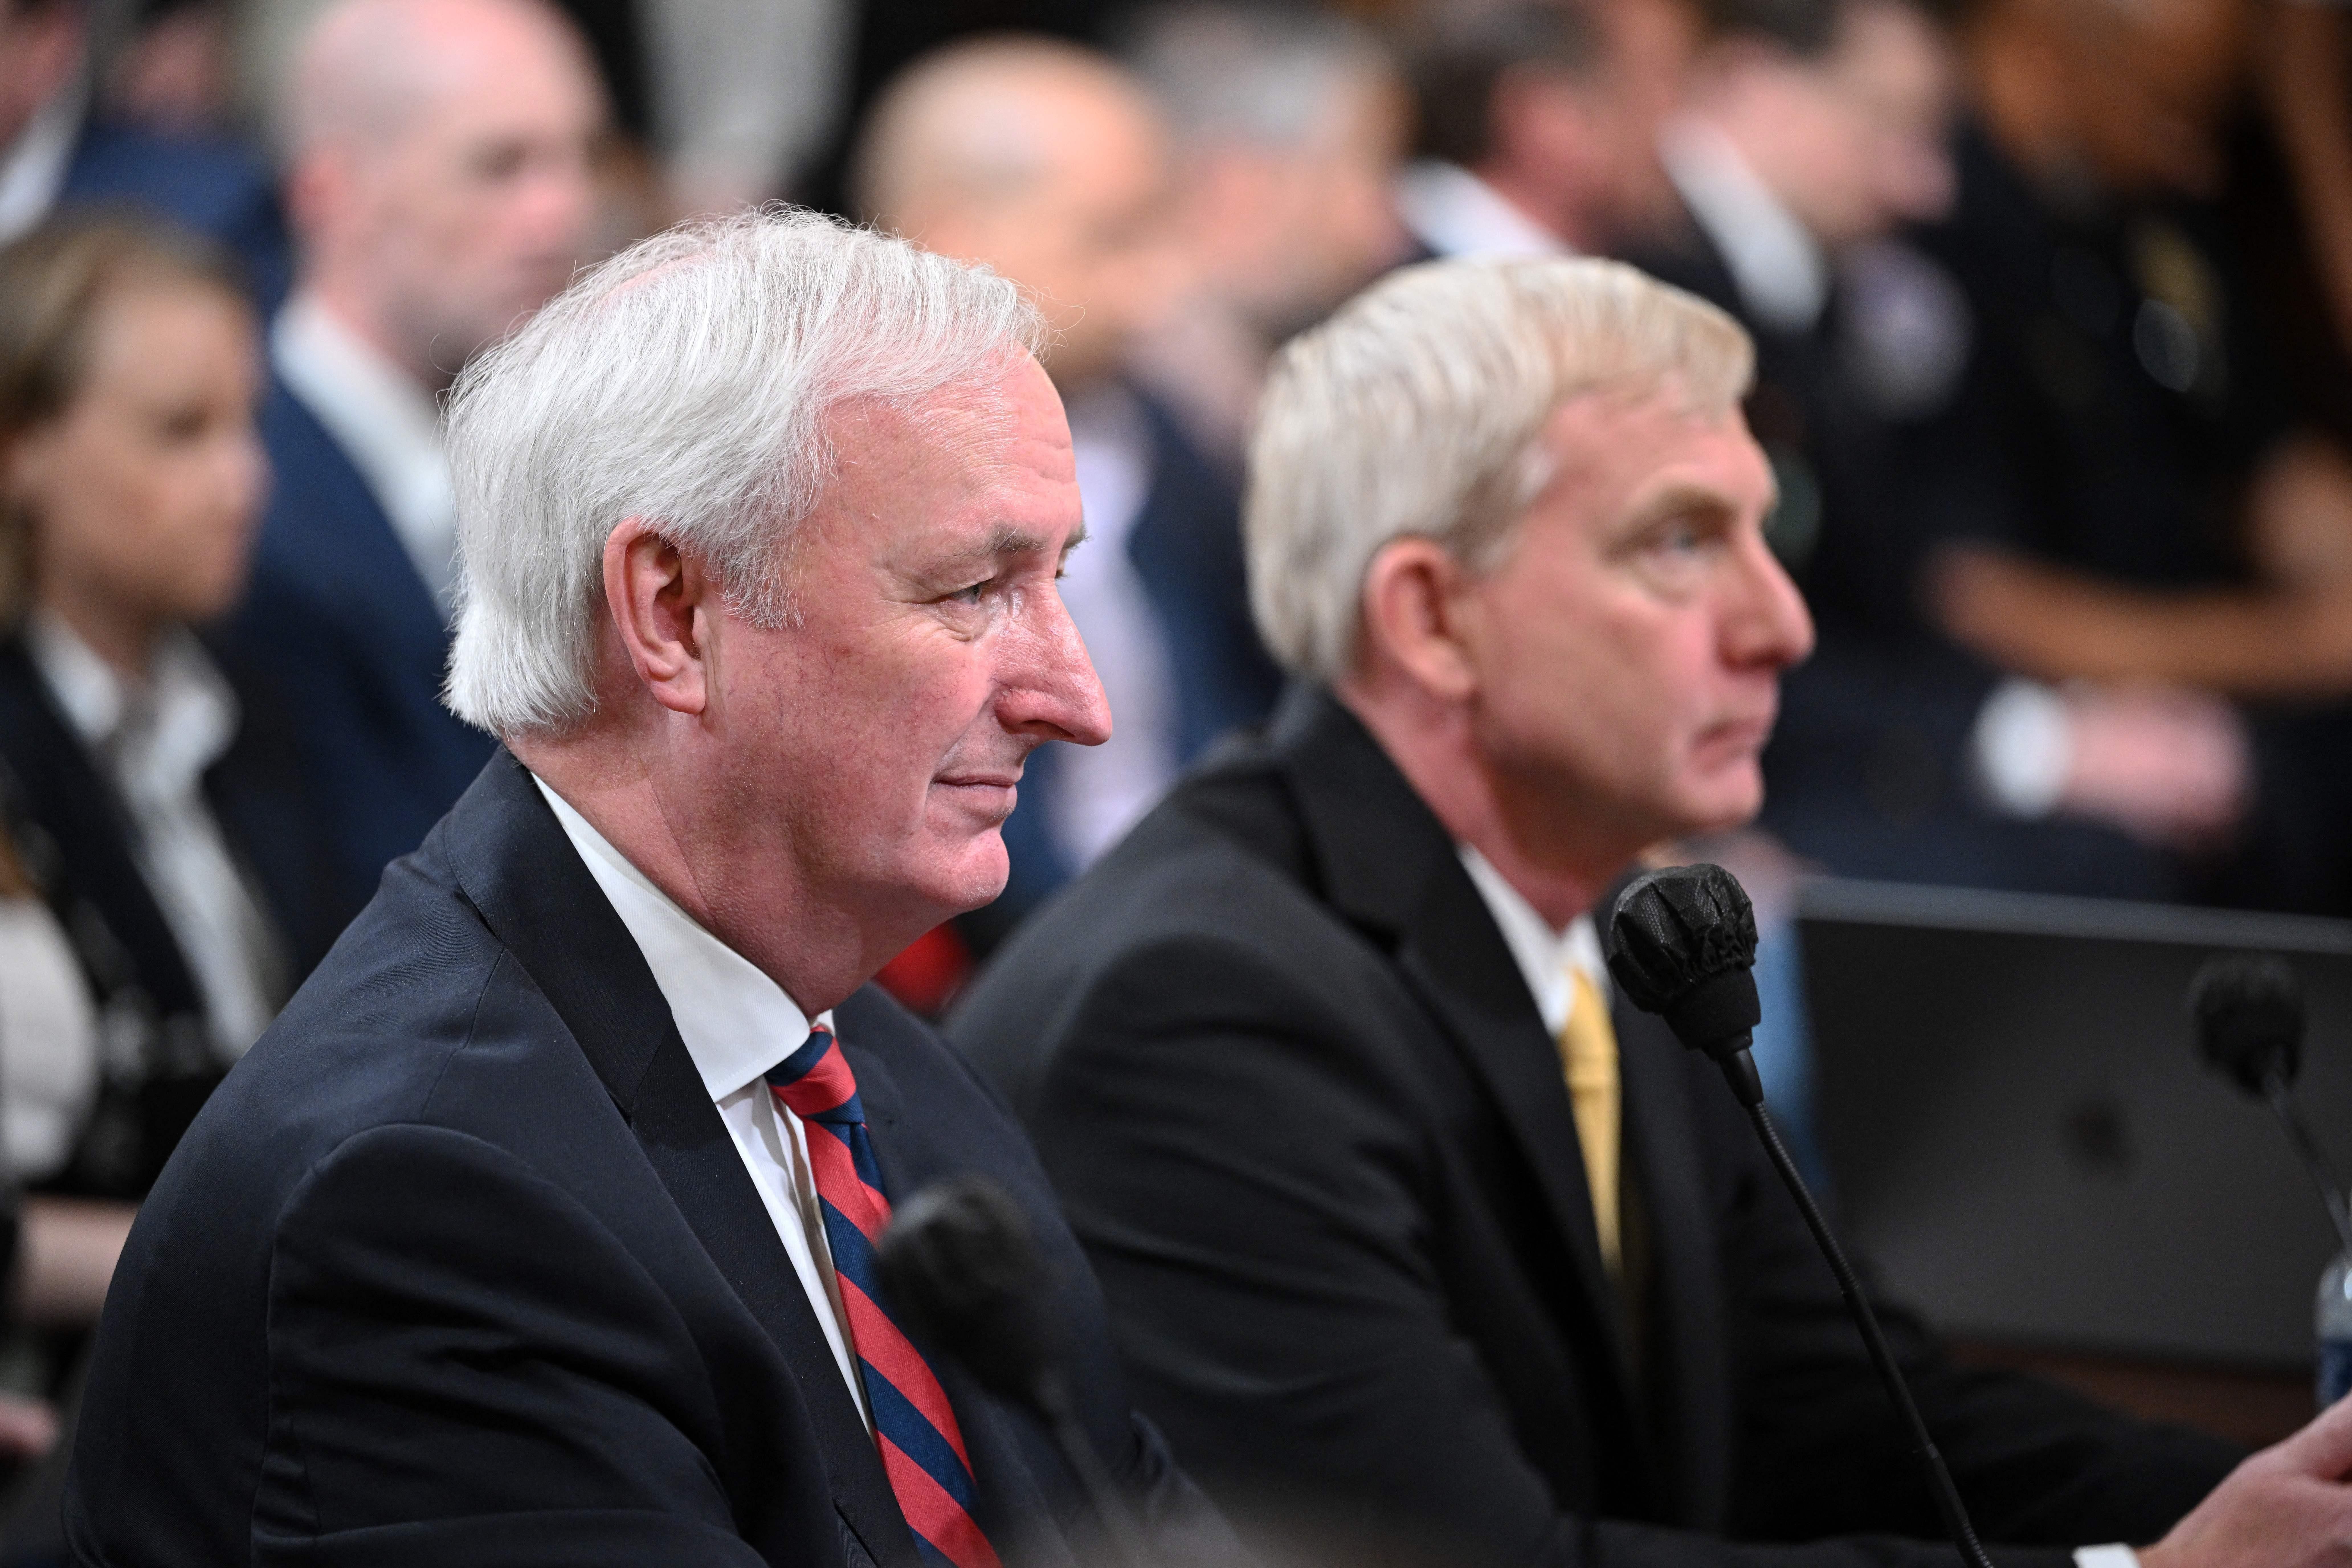 Former Acting Attorney General Jeffrey A. Rosen (L) and former Acting Deputy Attorney General Richard Donoghue (R) testify during the fifth hearing of the House Select Committee to Investigate the January 6 Attack on the U.S. Capitol in Washington, D.C. on June 23, 2022.